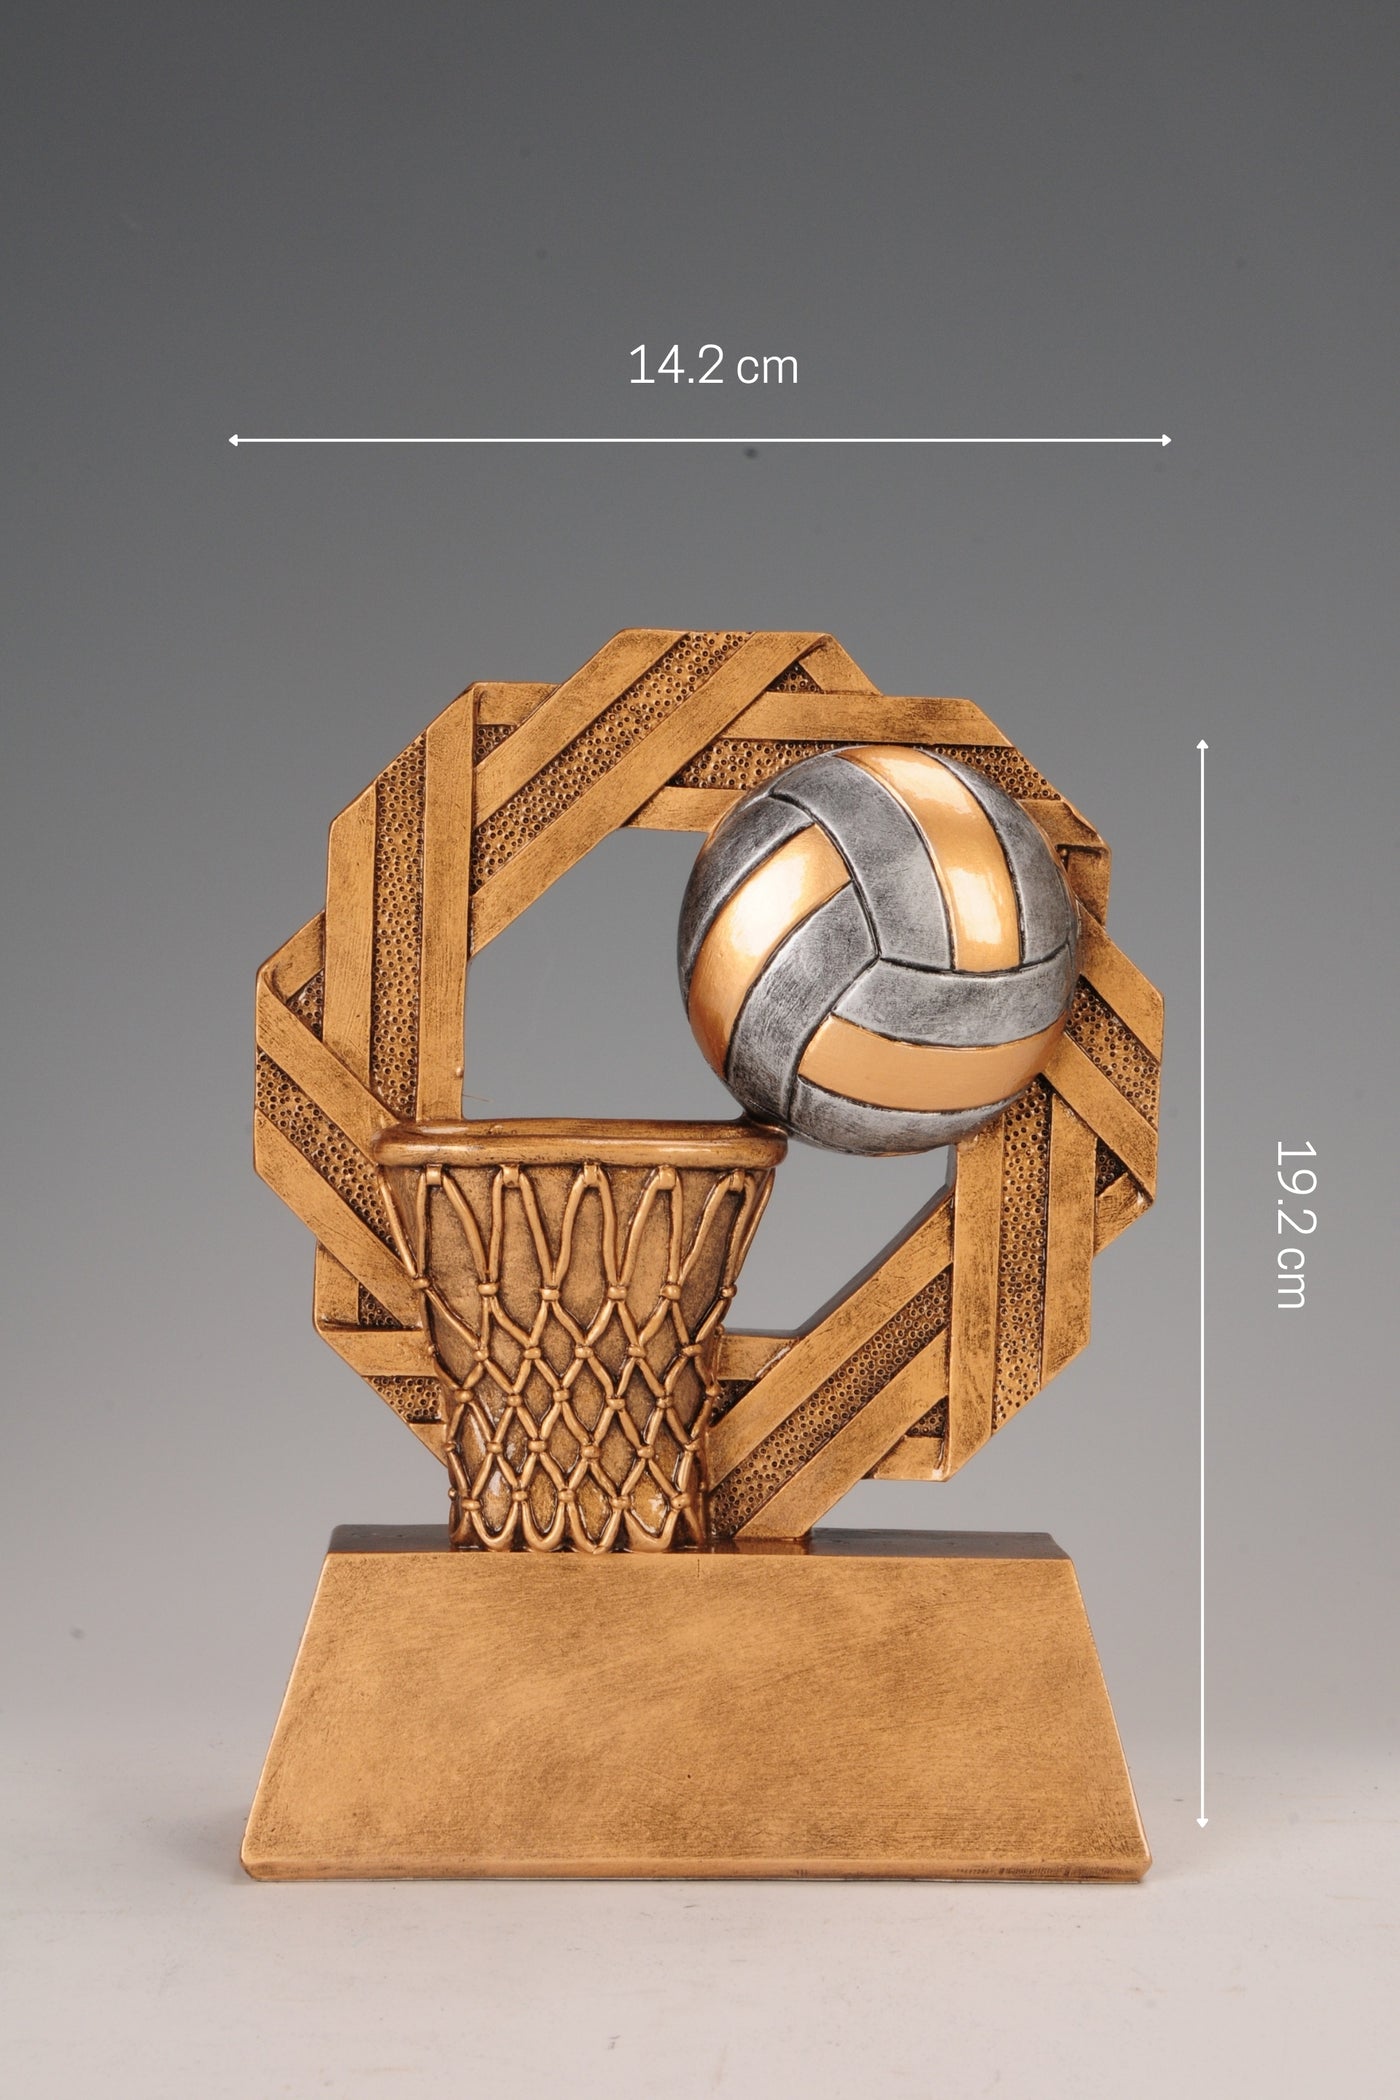 Basketball Sculpture showpiece for your home or office decor